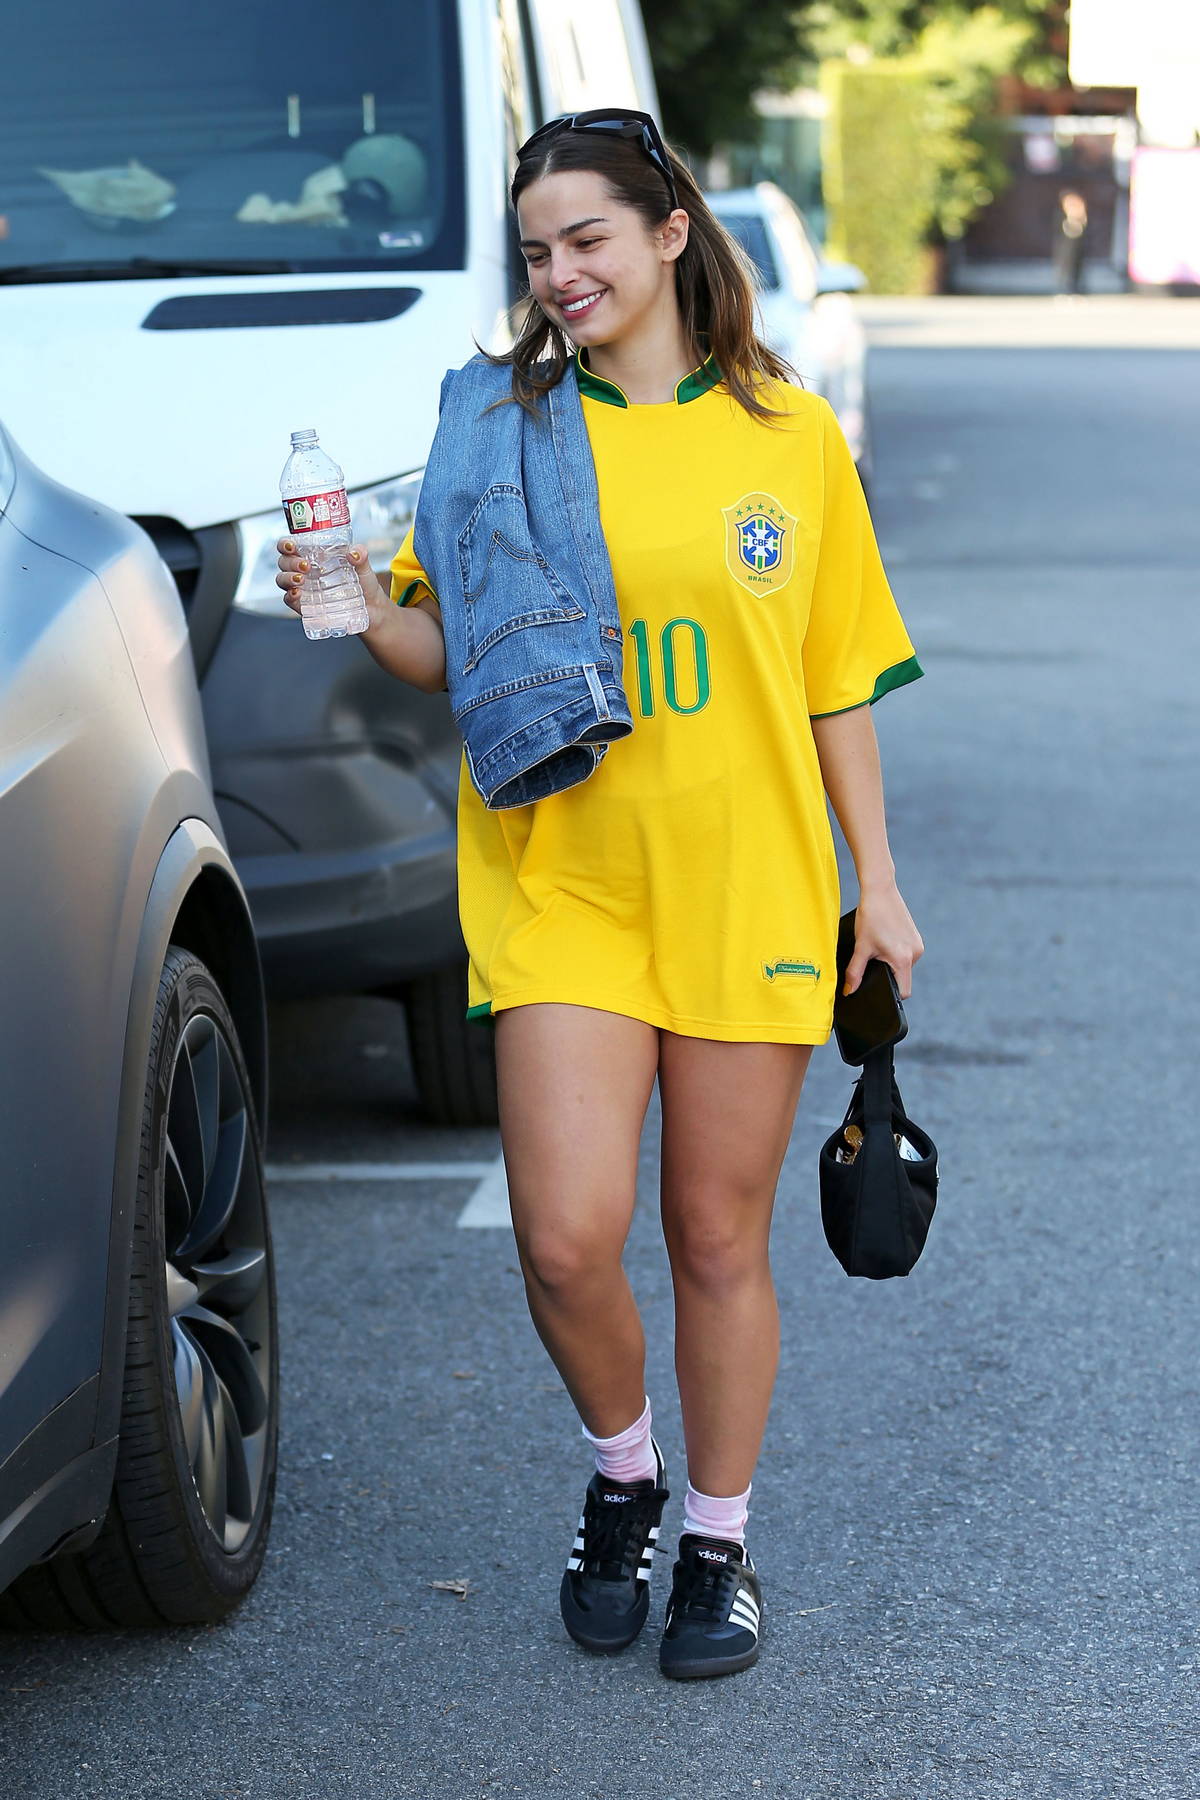 addison rae rocks a brazil football jersey and carries her jeans